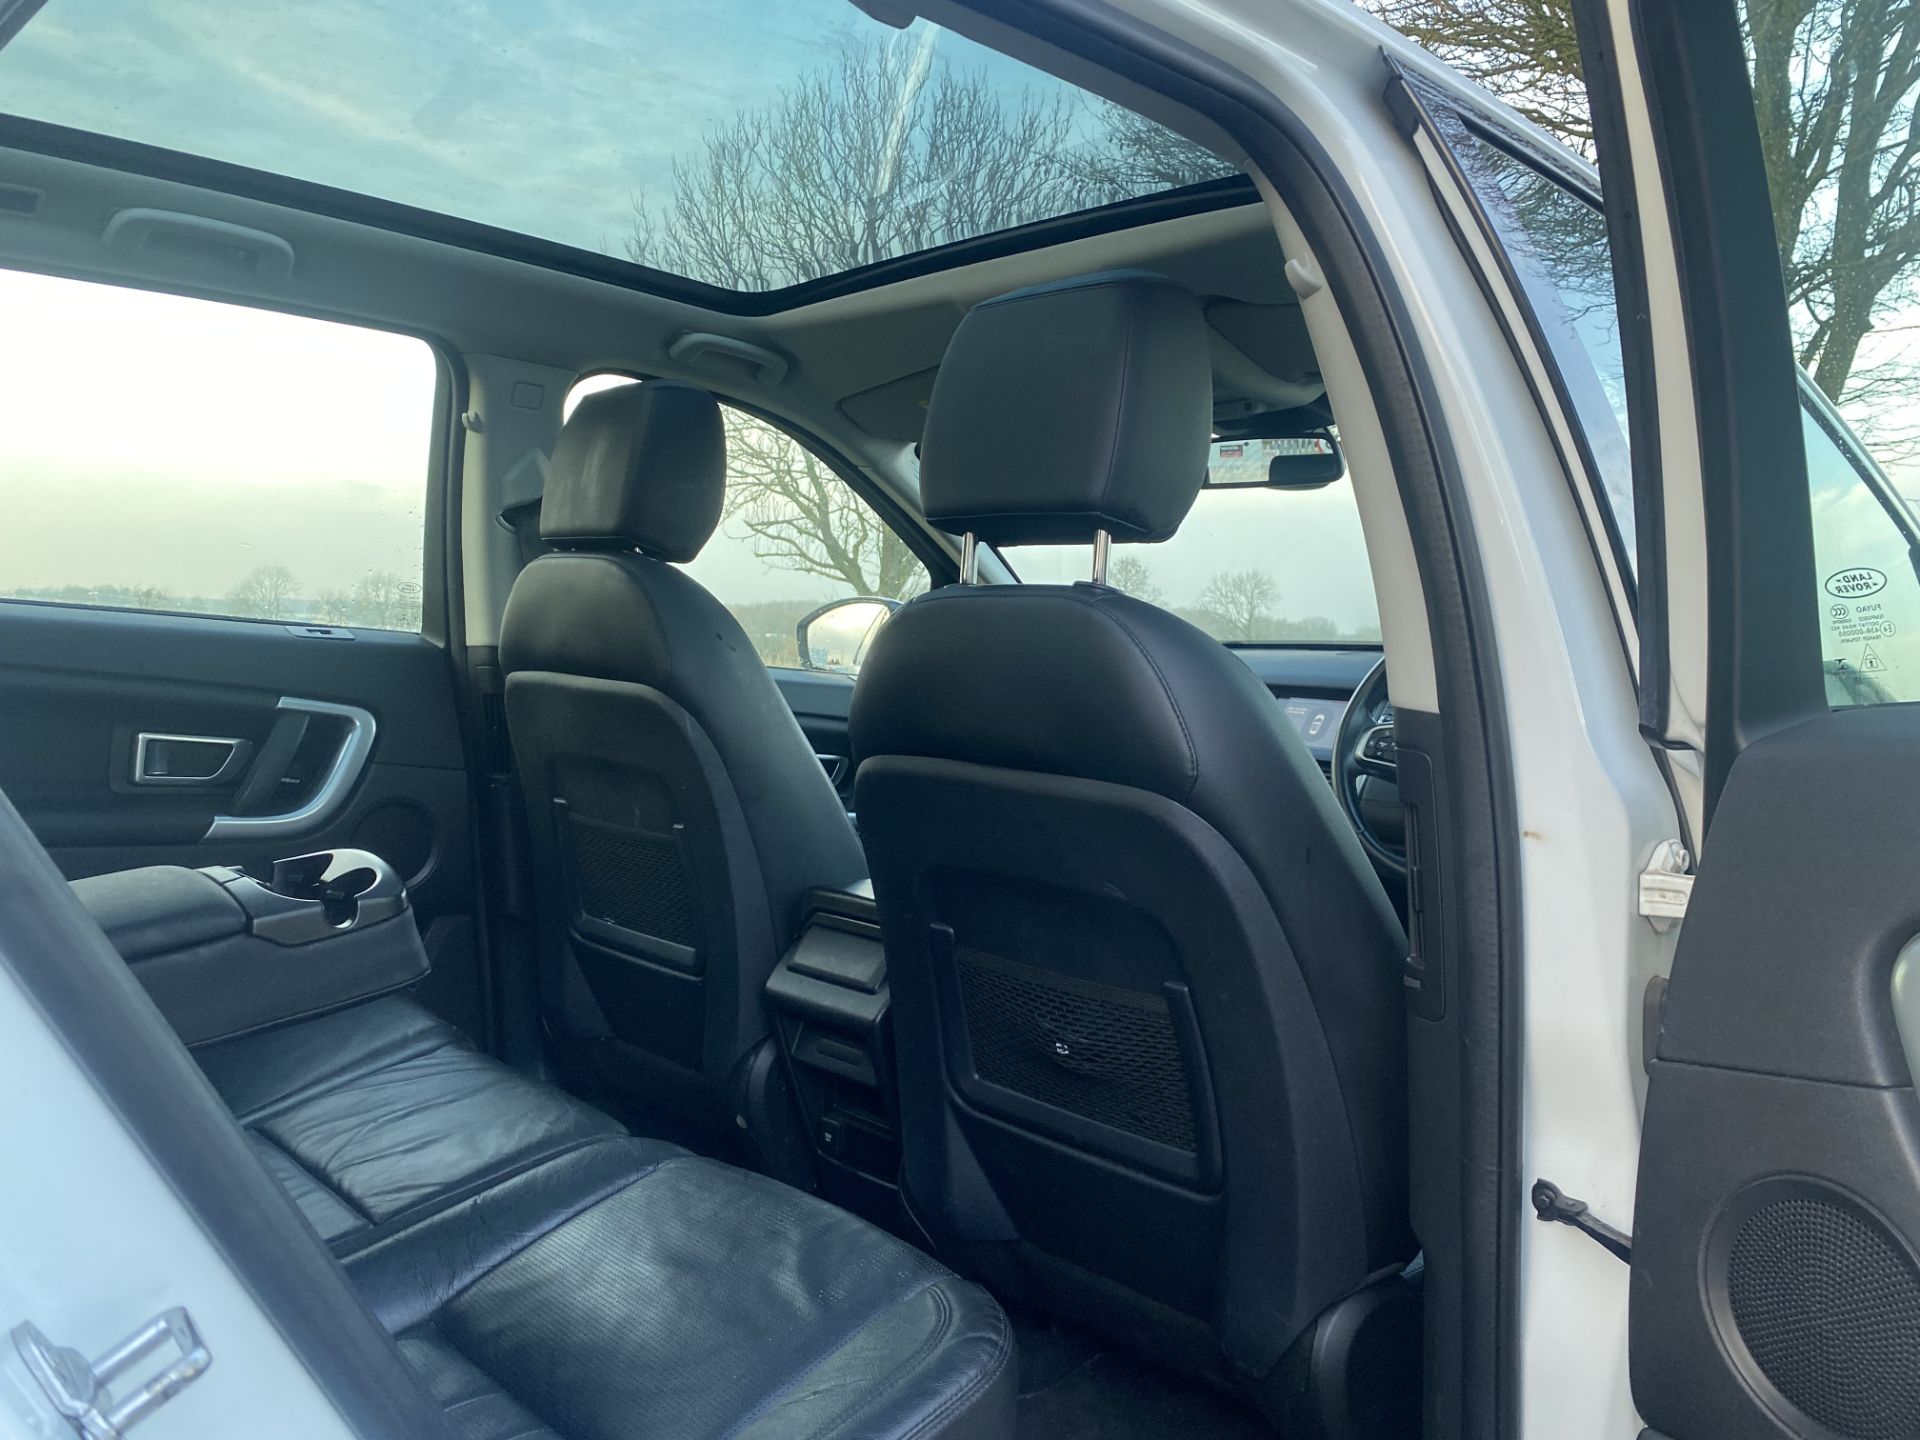 (ON SALE) LANDROVER DISCOVERY SPORT "HSE" 18 REG - 1 OWNER - LEATHER PANORAMIC ROOF - FULLY LOADED - - Image 25 of 37